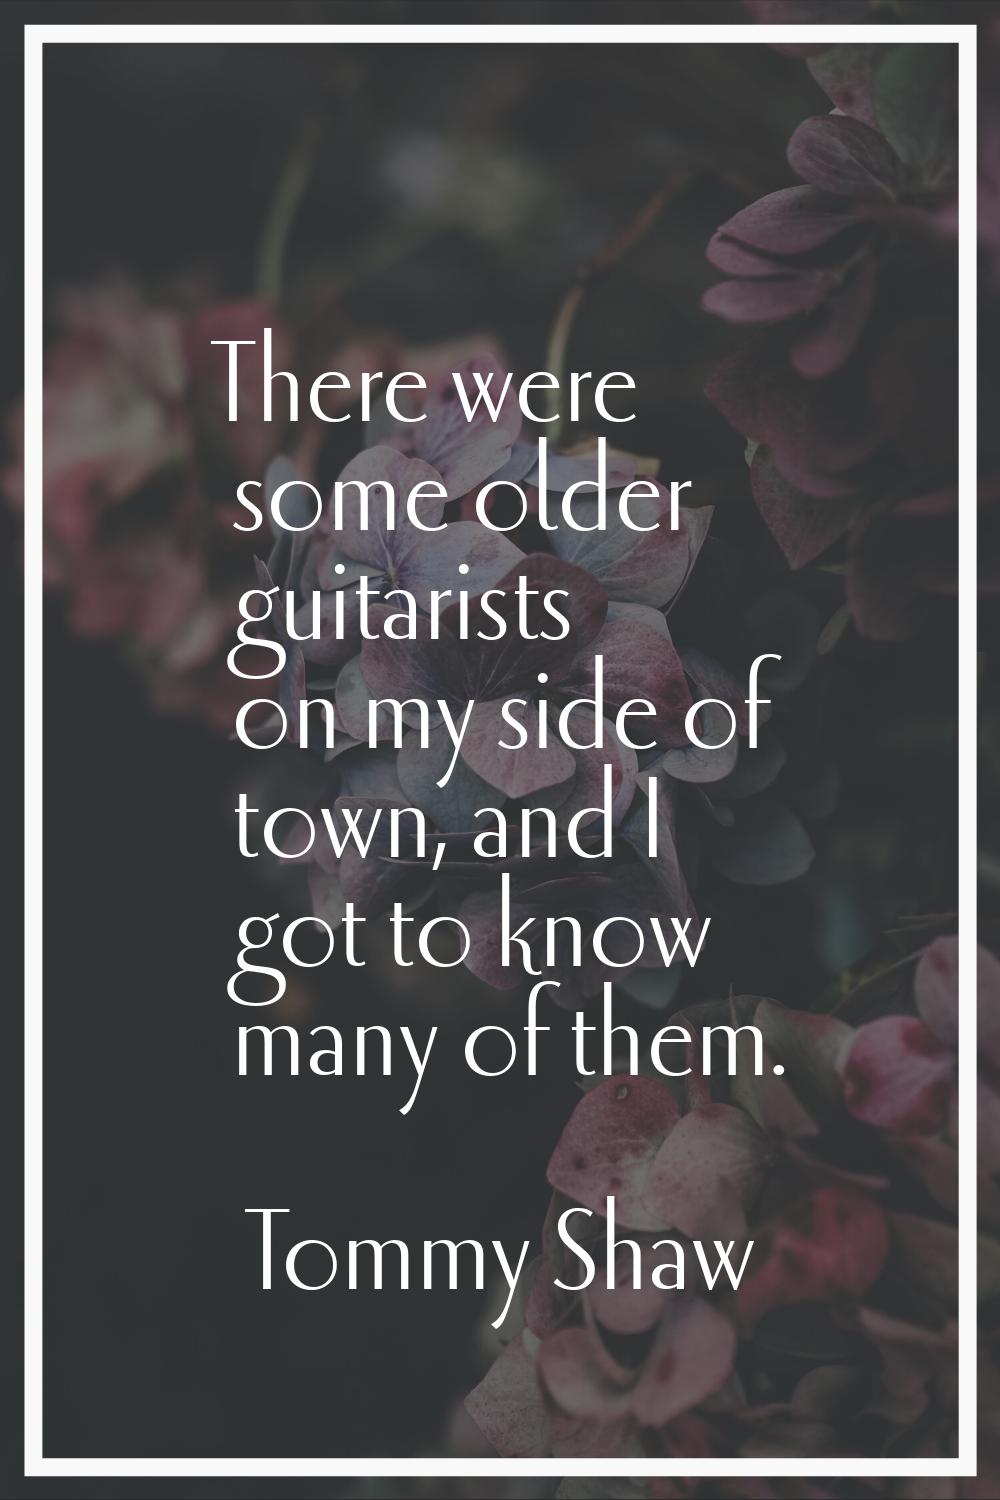 There were some older guitarists on my side of town, and I got to know many of them.